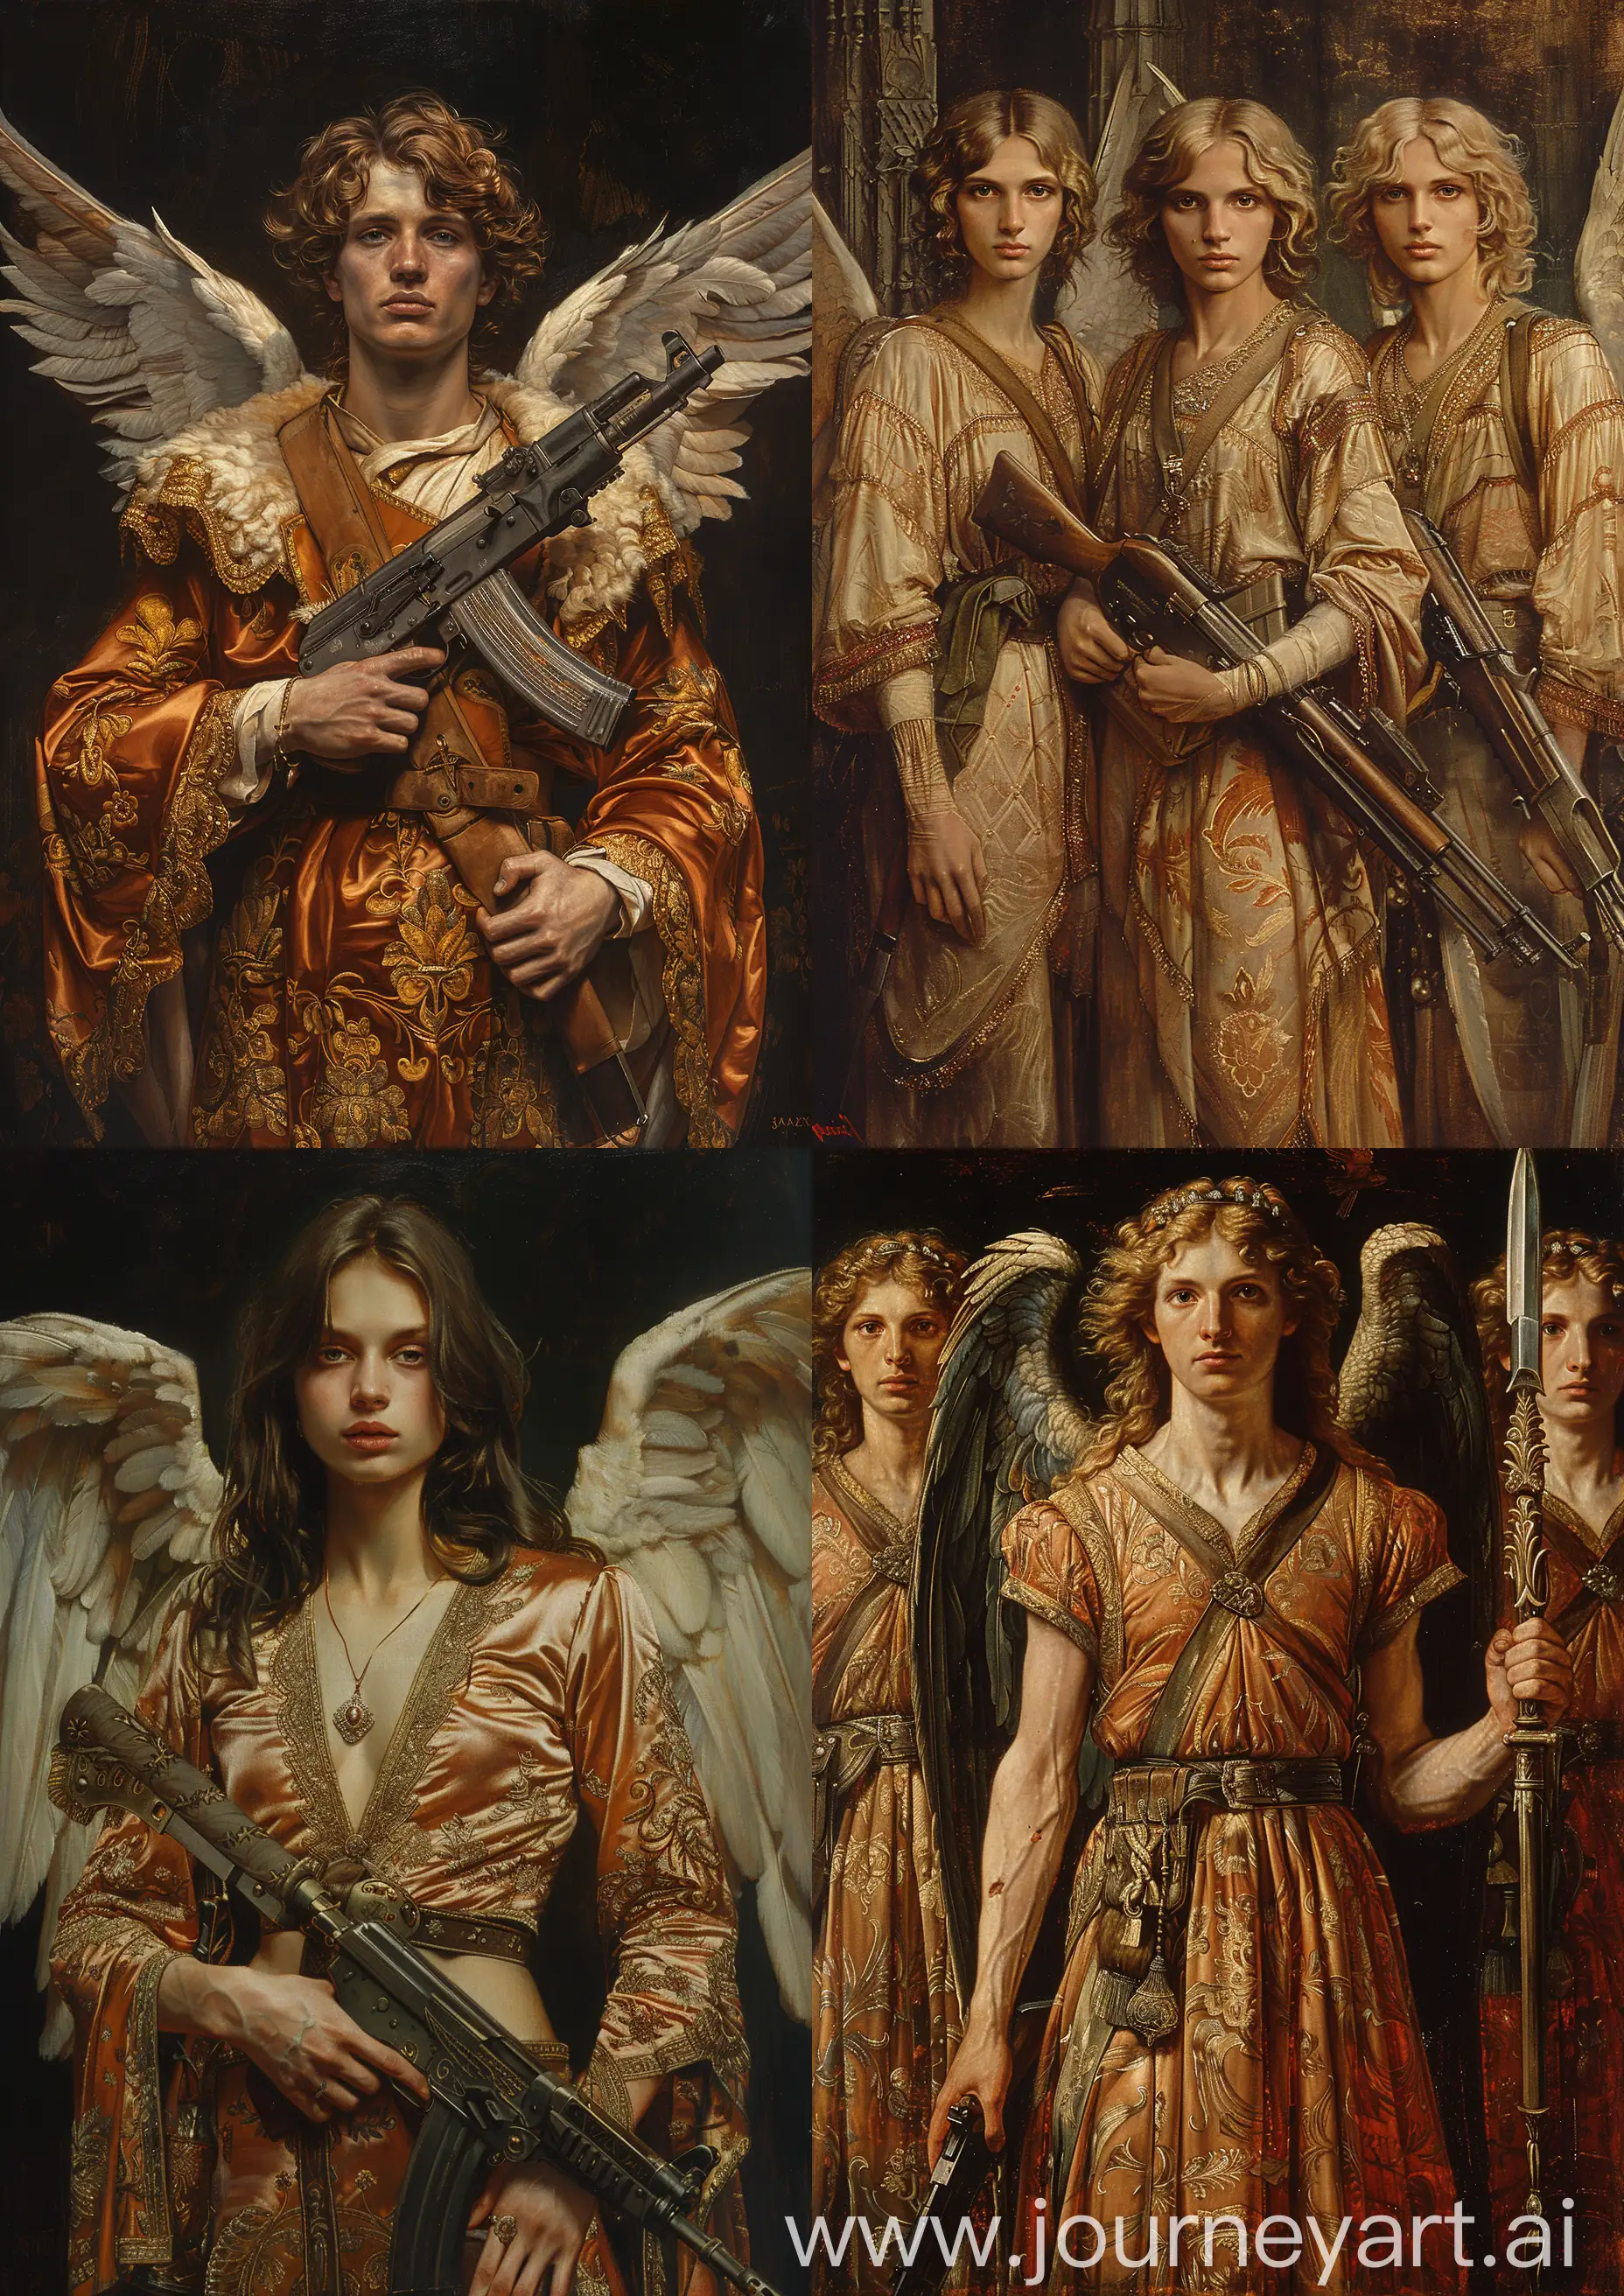 Ornate-Silk-Robed-Male-Angel-Warriors-with-AK47-in-Earth-Tones